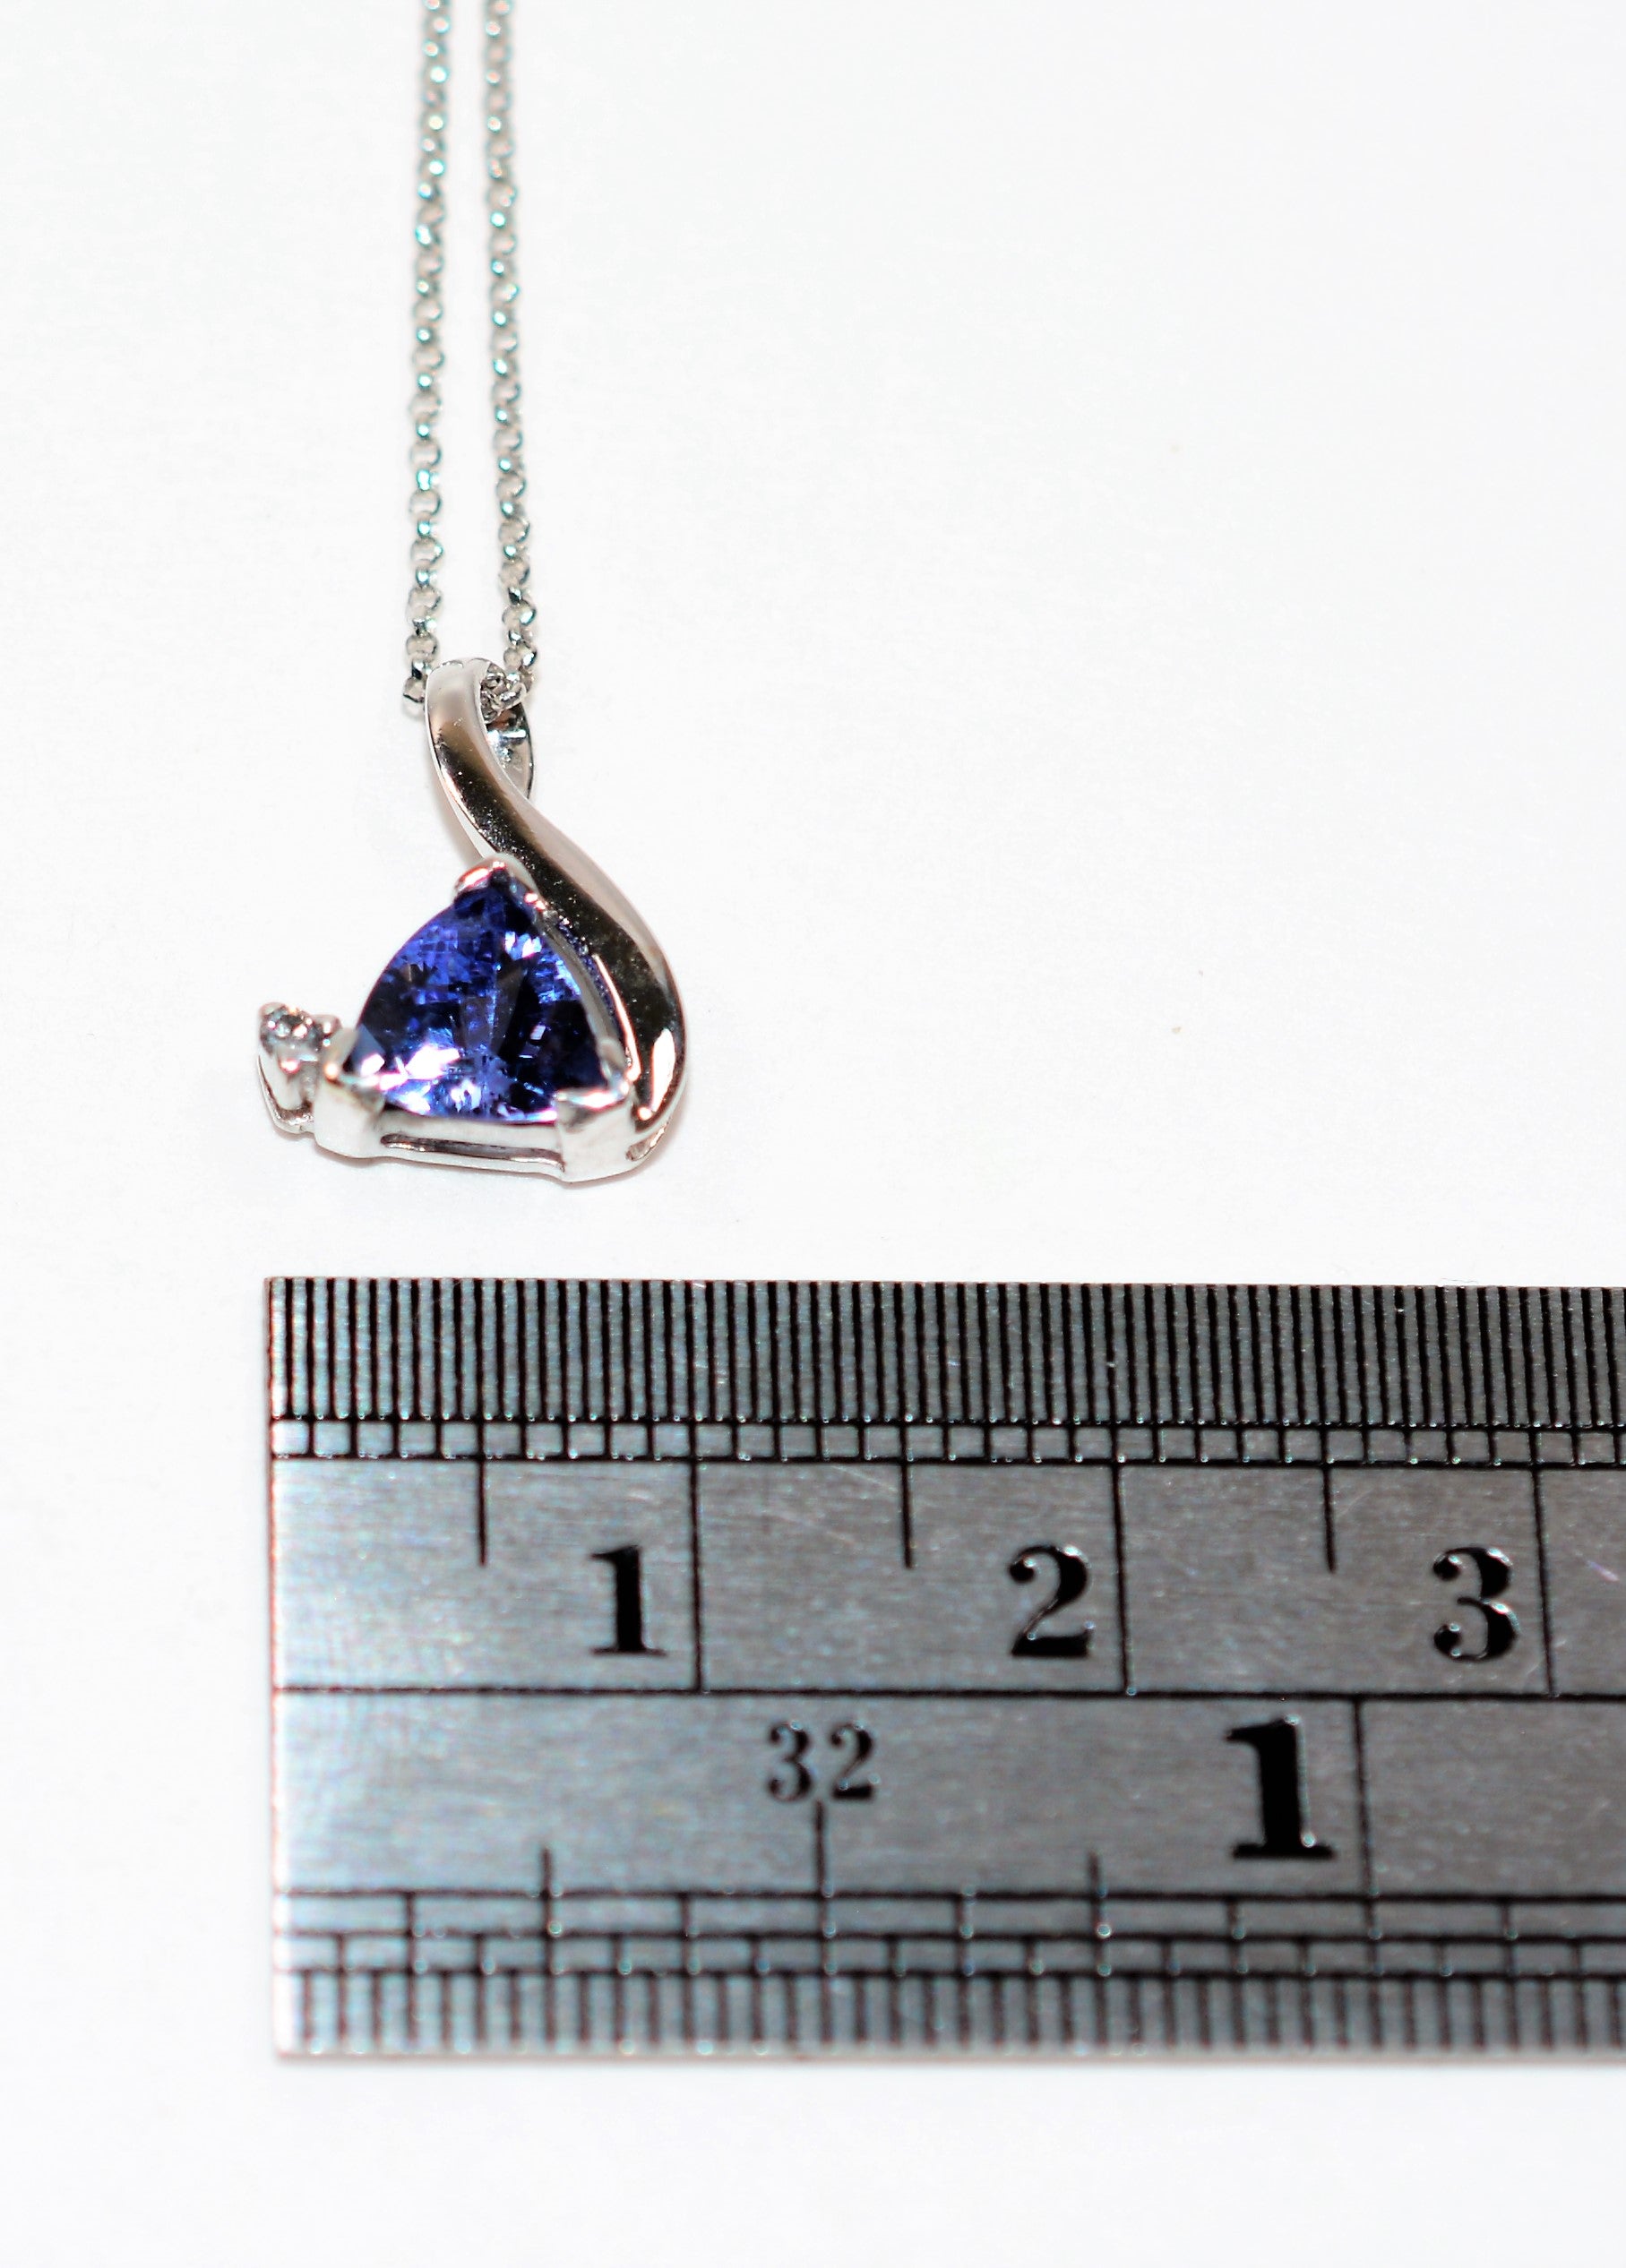 Natural Tanzanite & Diamond Necklace 14K Solid White Gold 1.00tcw Gemstone Necklace Cocktail Necklace Purple Necklace Birthstone Necklace